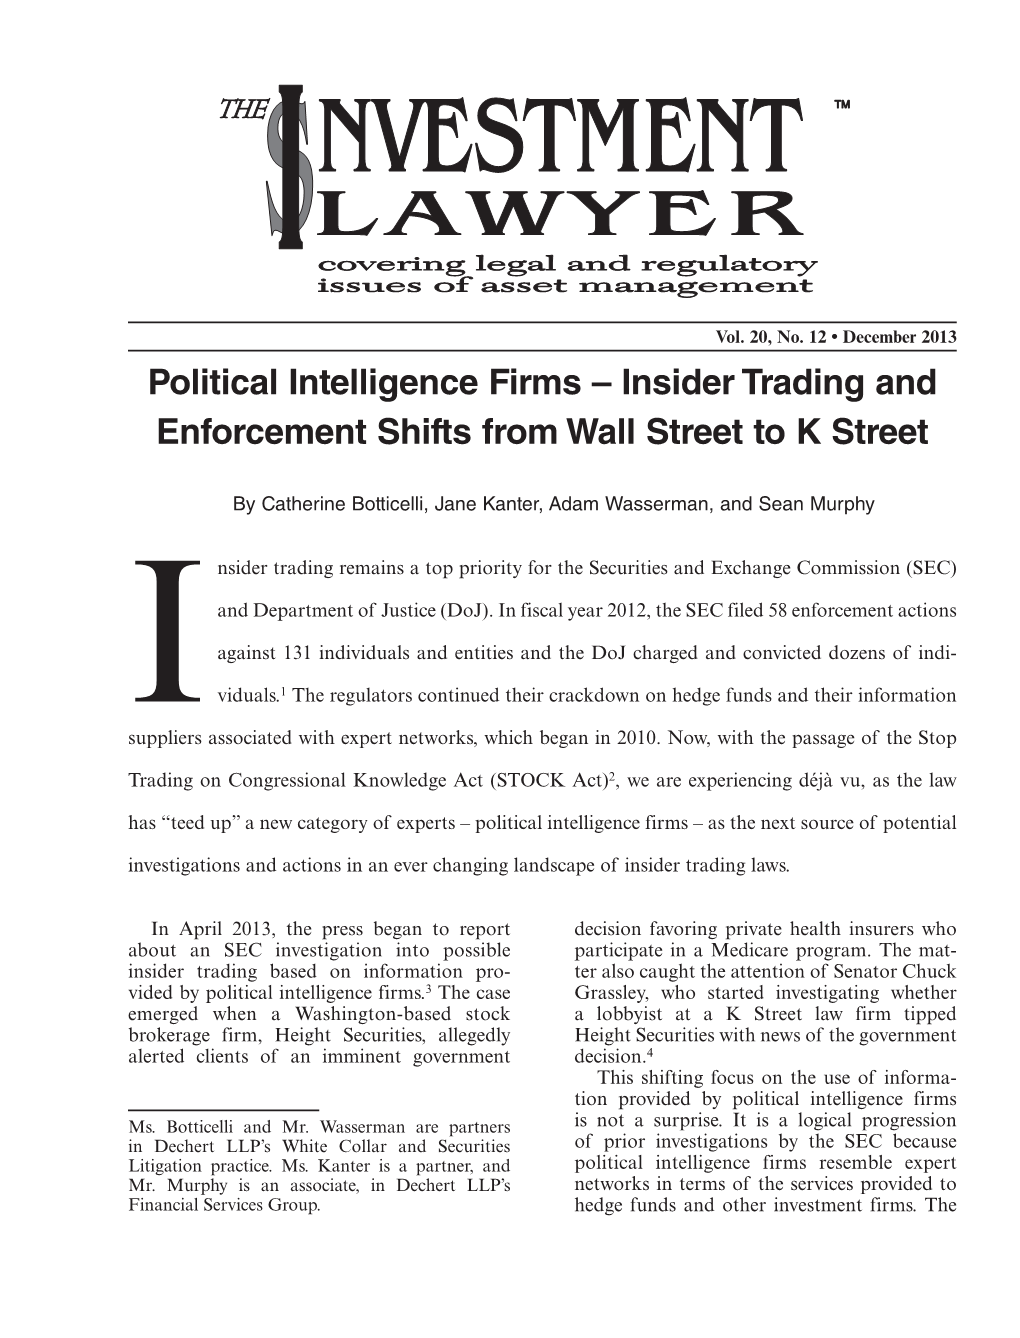 Political Intelligence Firms – Insider Trading and Enforcement Shifts from Wall Street to K Street